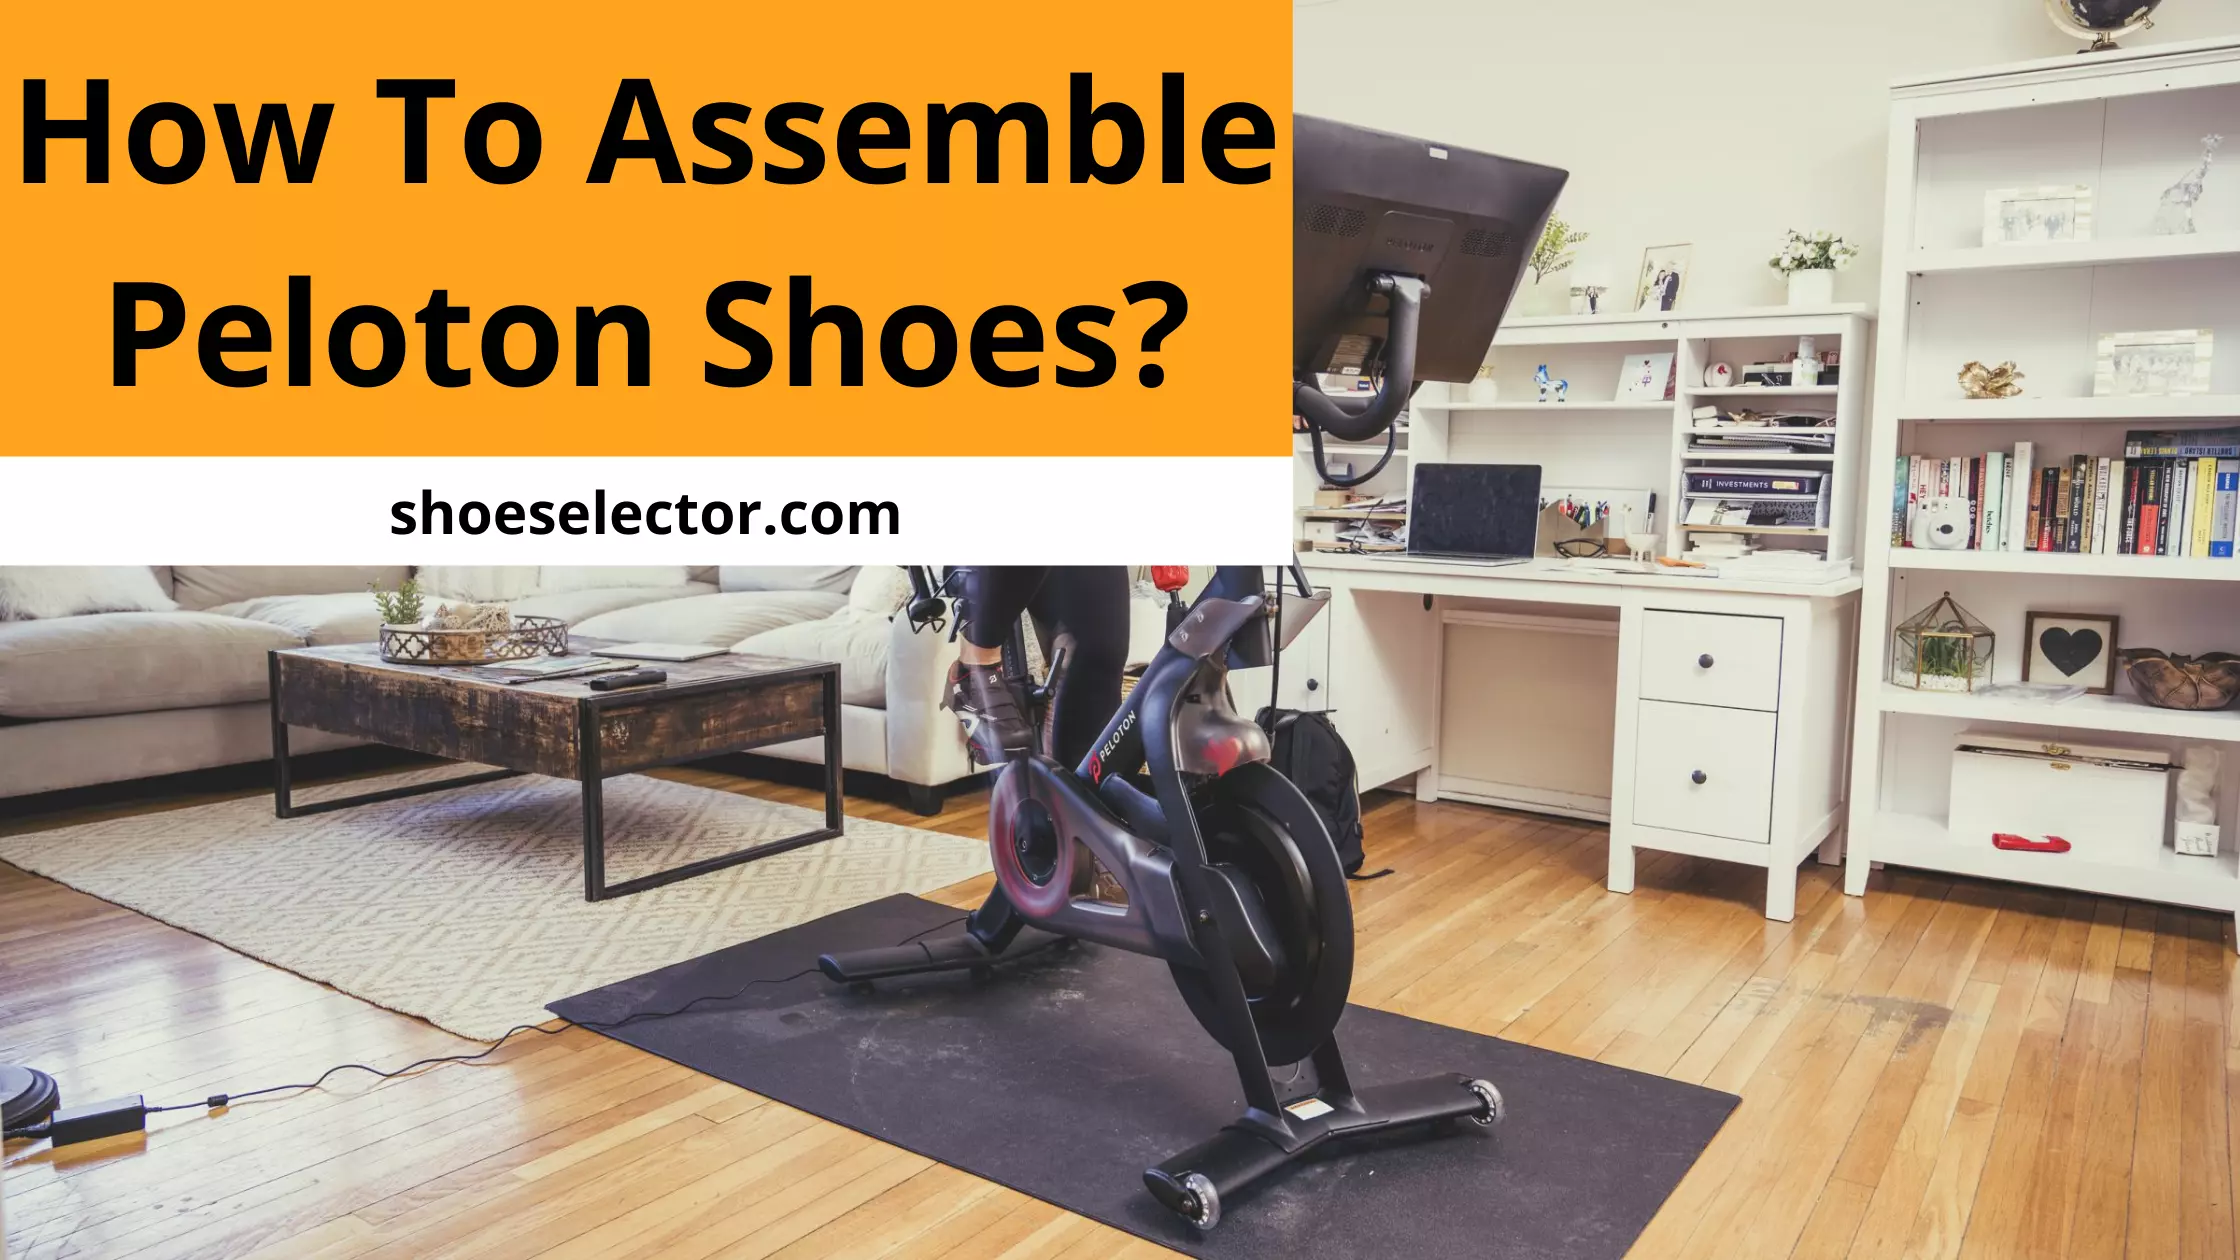 How To Assemble Peloton Shoes? - Solution Guide